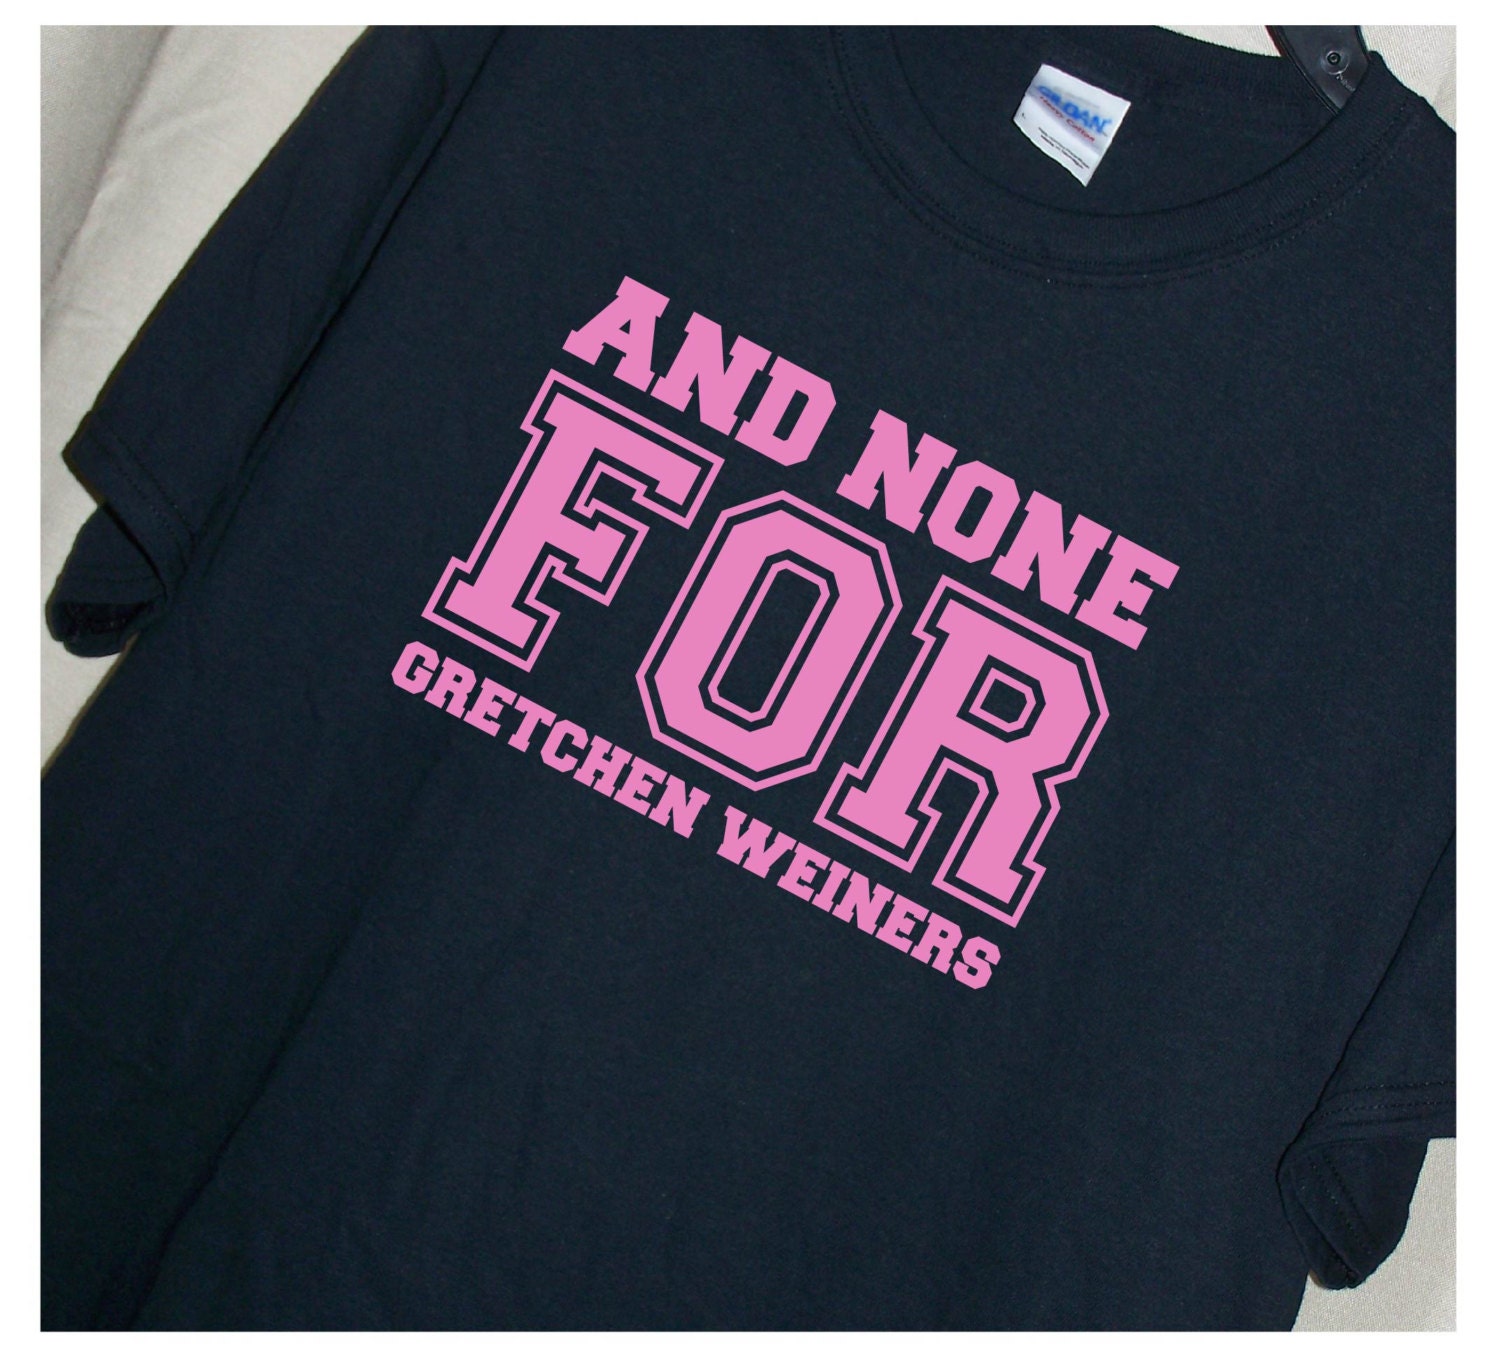 And None For Gretchen Weiners Tshirt Mean Girls Movie Quote 0123